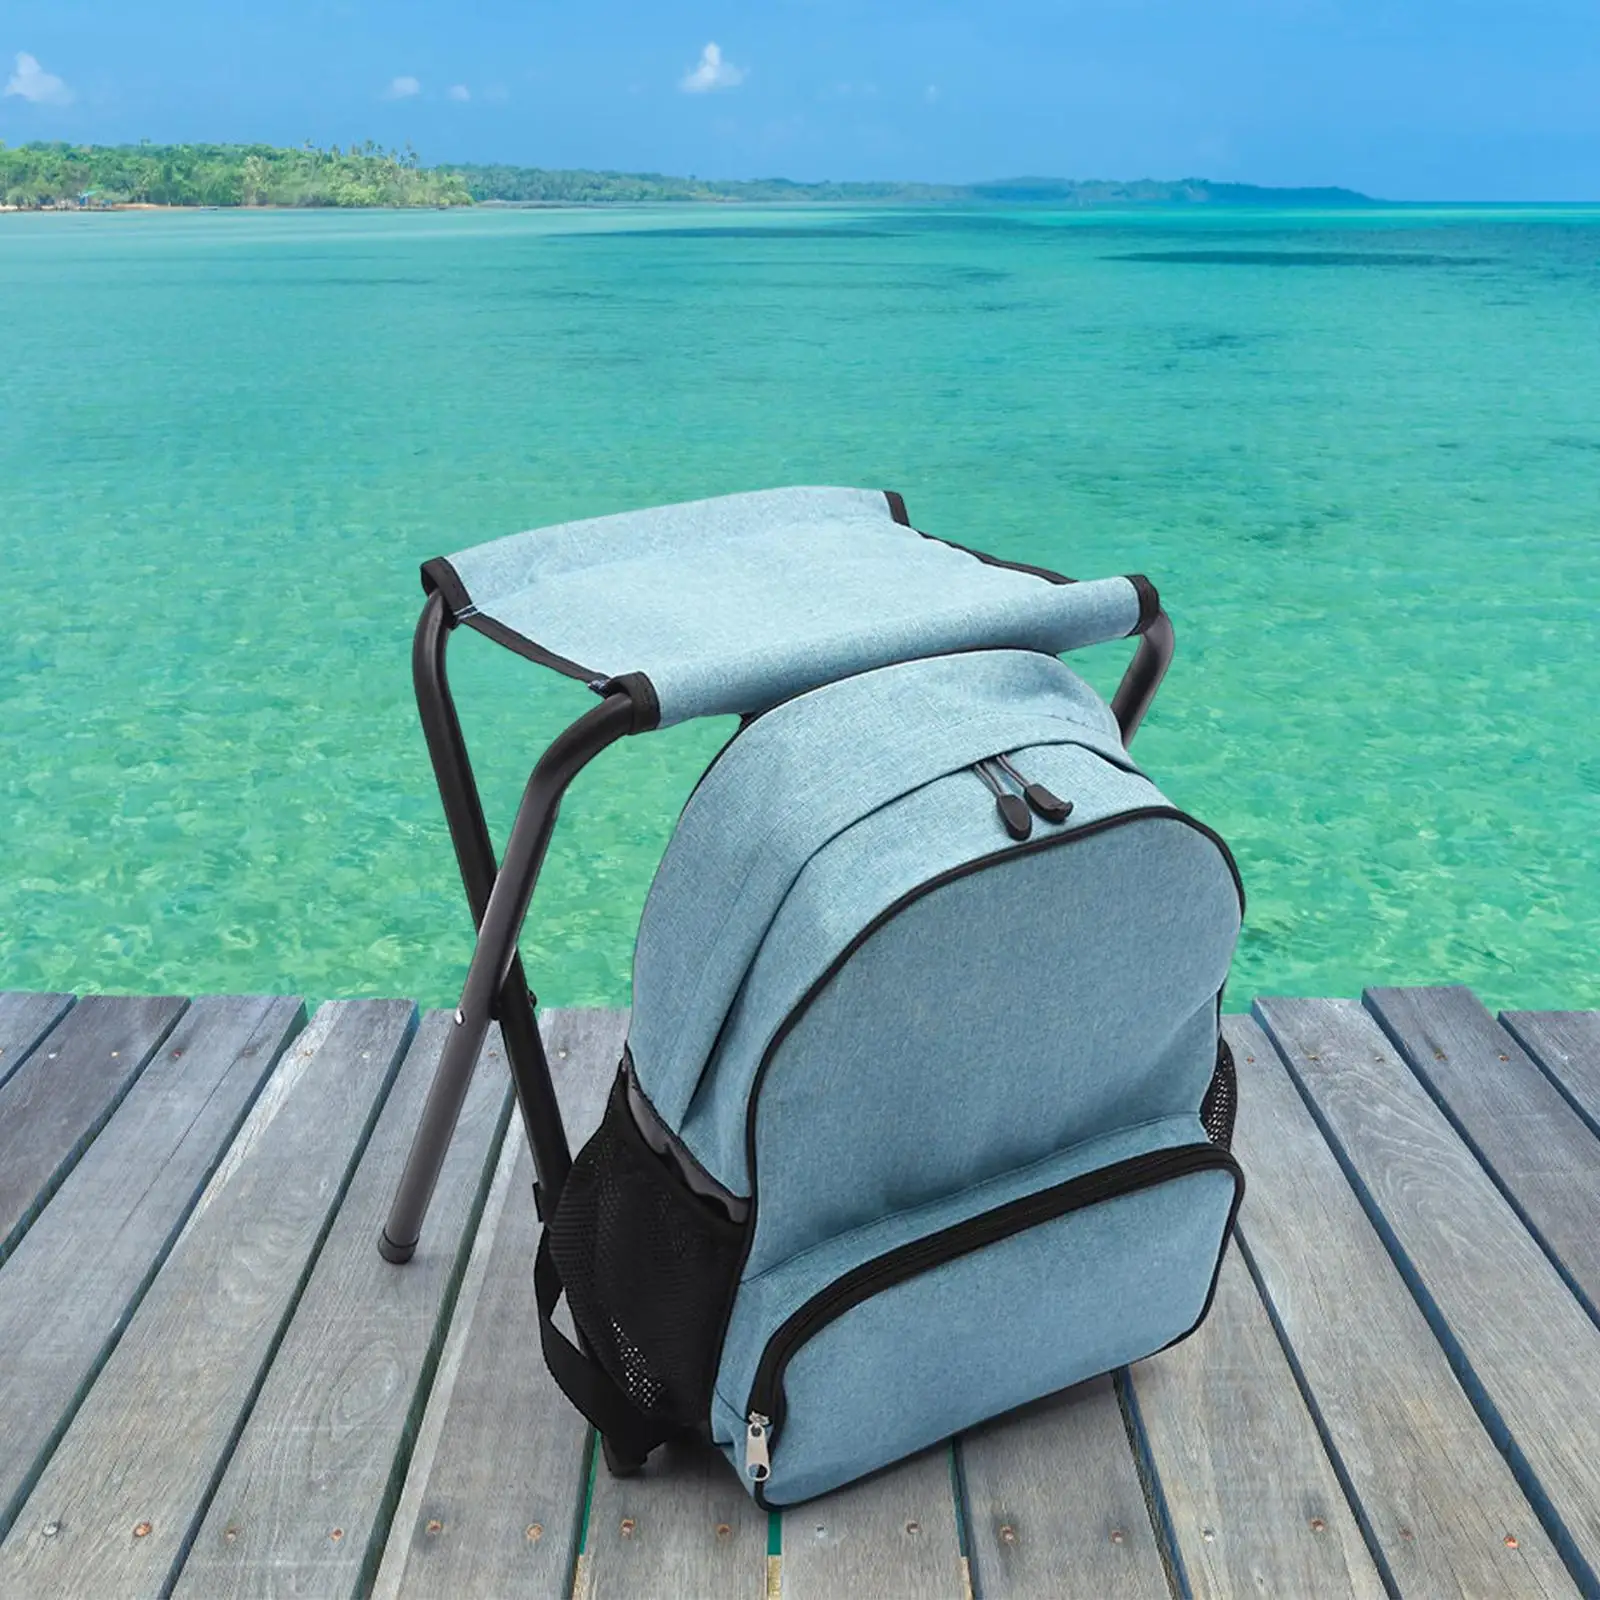 Fishing Seat Compact detachable backpack seat for hiking on the fishing beach